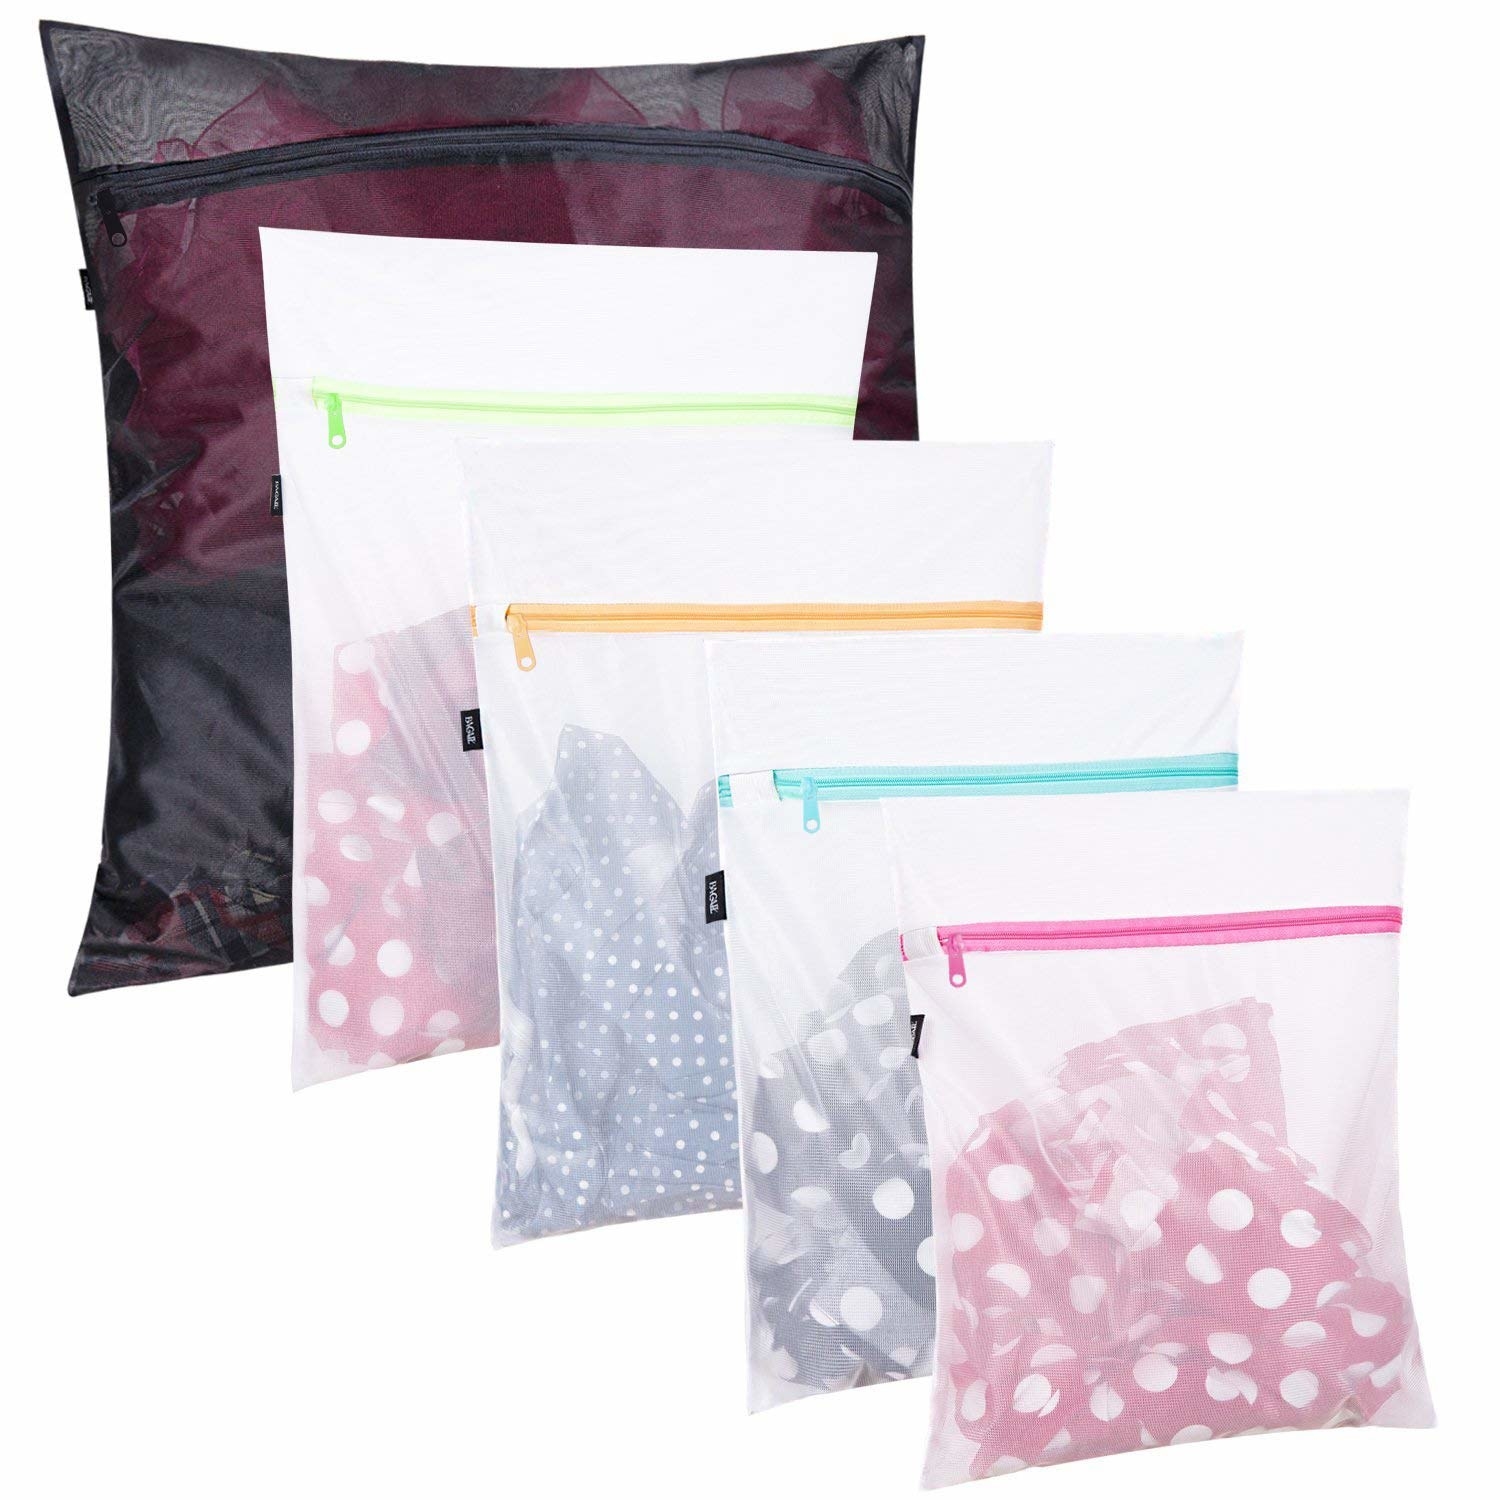 Five mesh bags with zippers at the top The bags are different sizes and filled with clothes